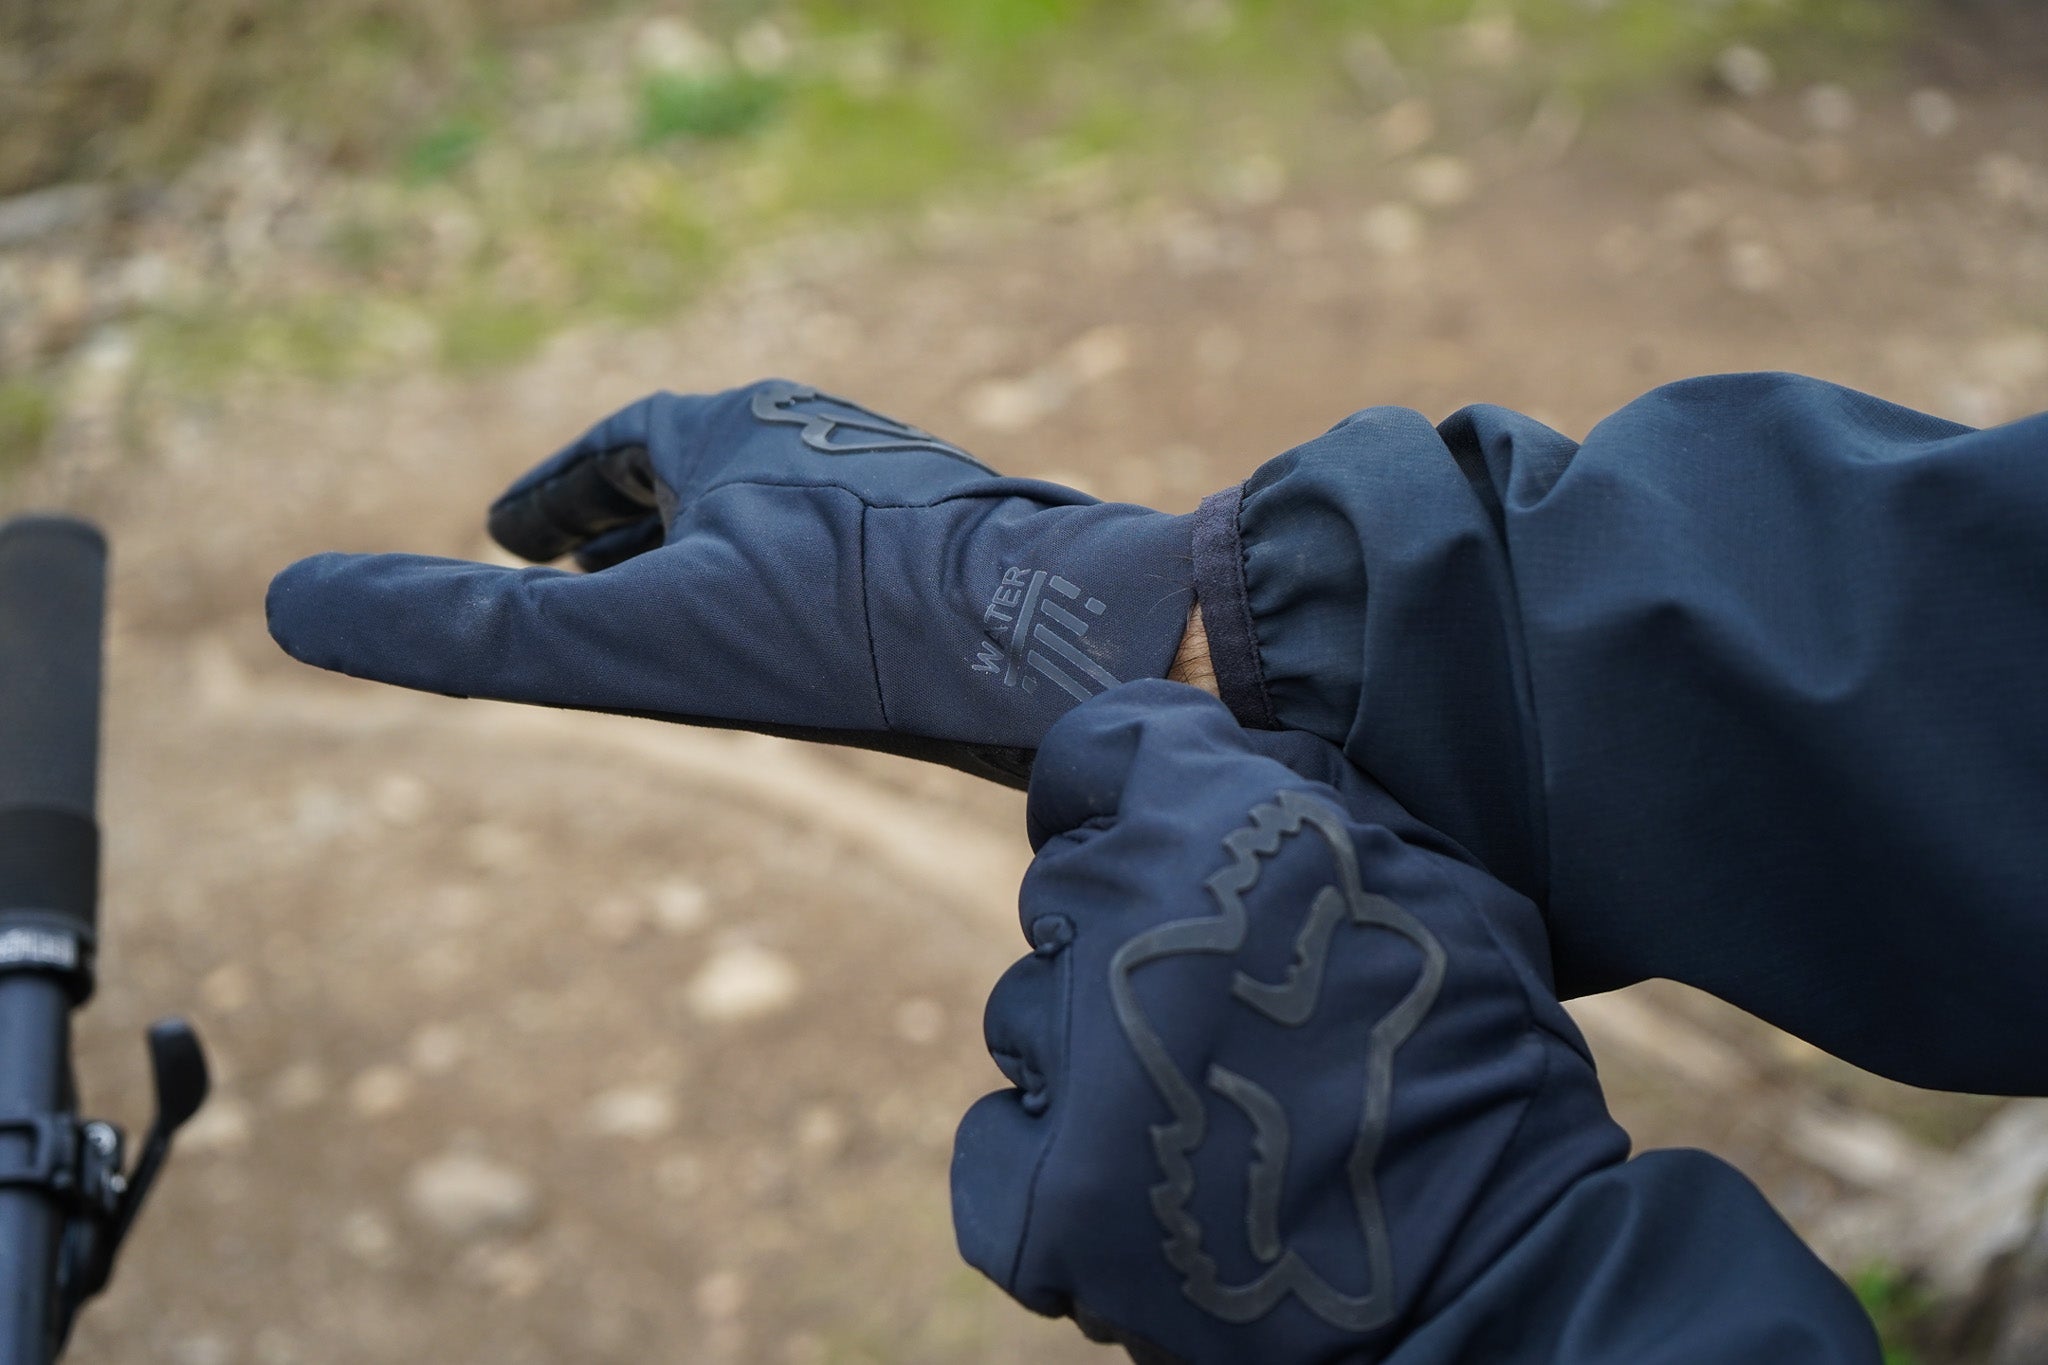 A longer cuff and waterproof architecture make the Ranger Water glove a winter necessity